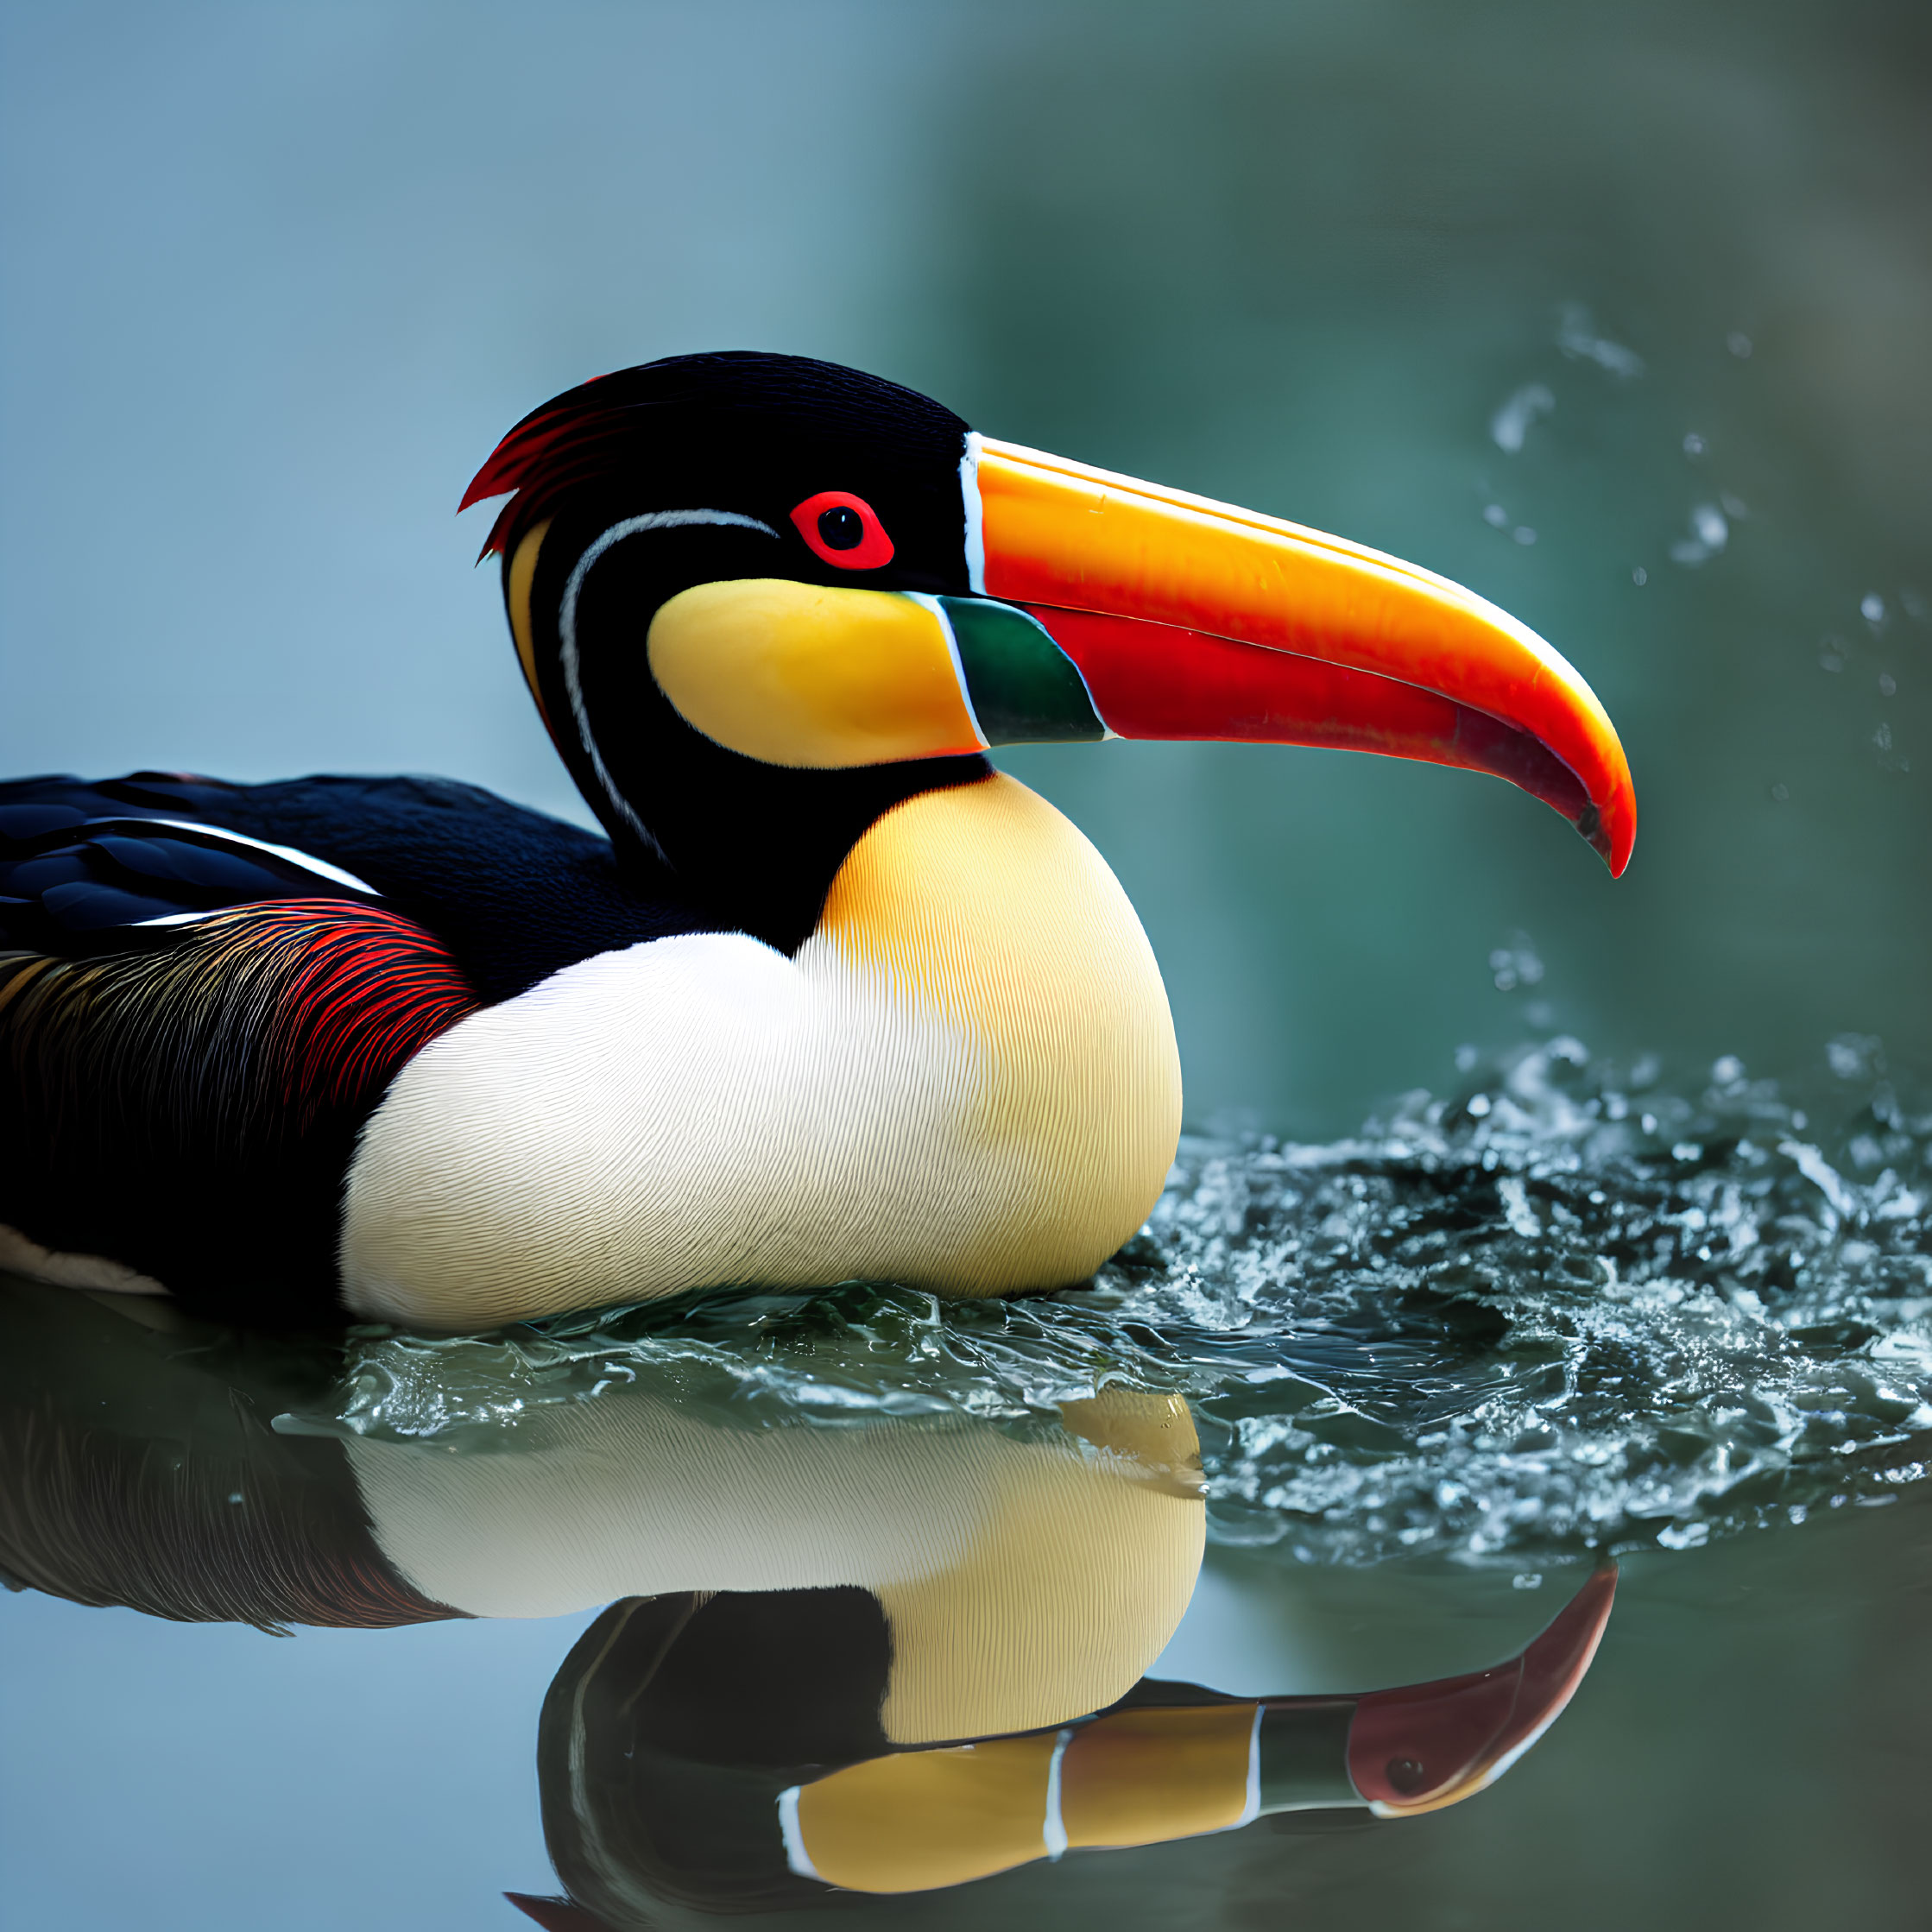 Colorful Toucan with Large Bill Reflected in Water